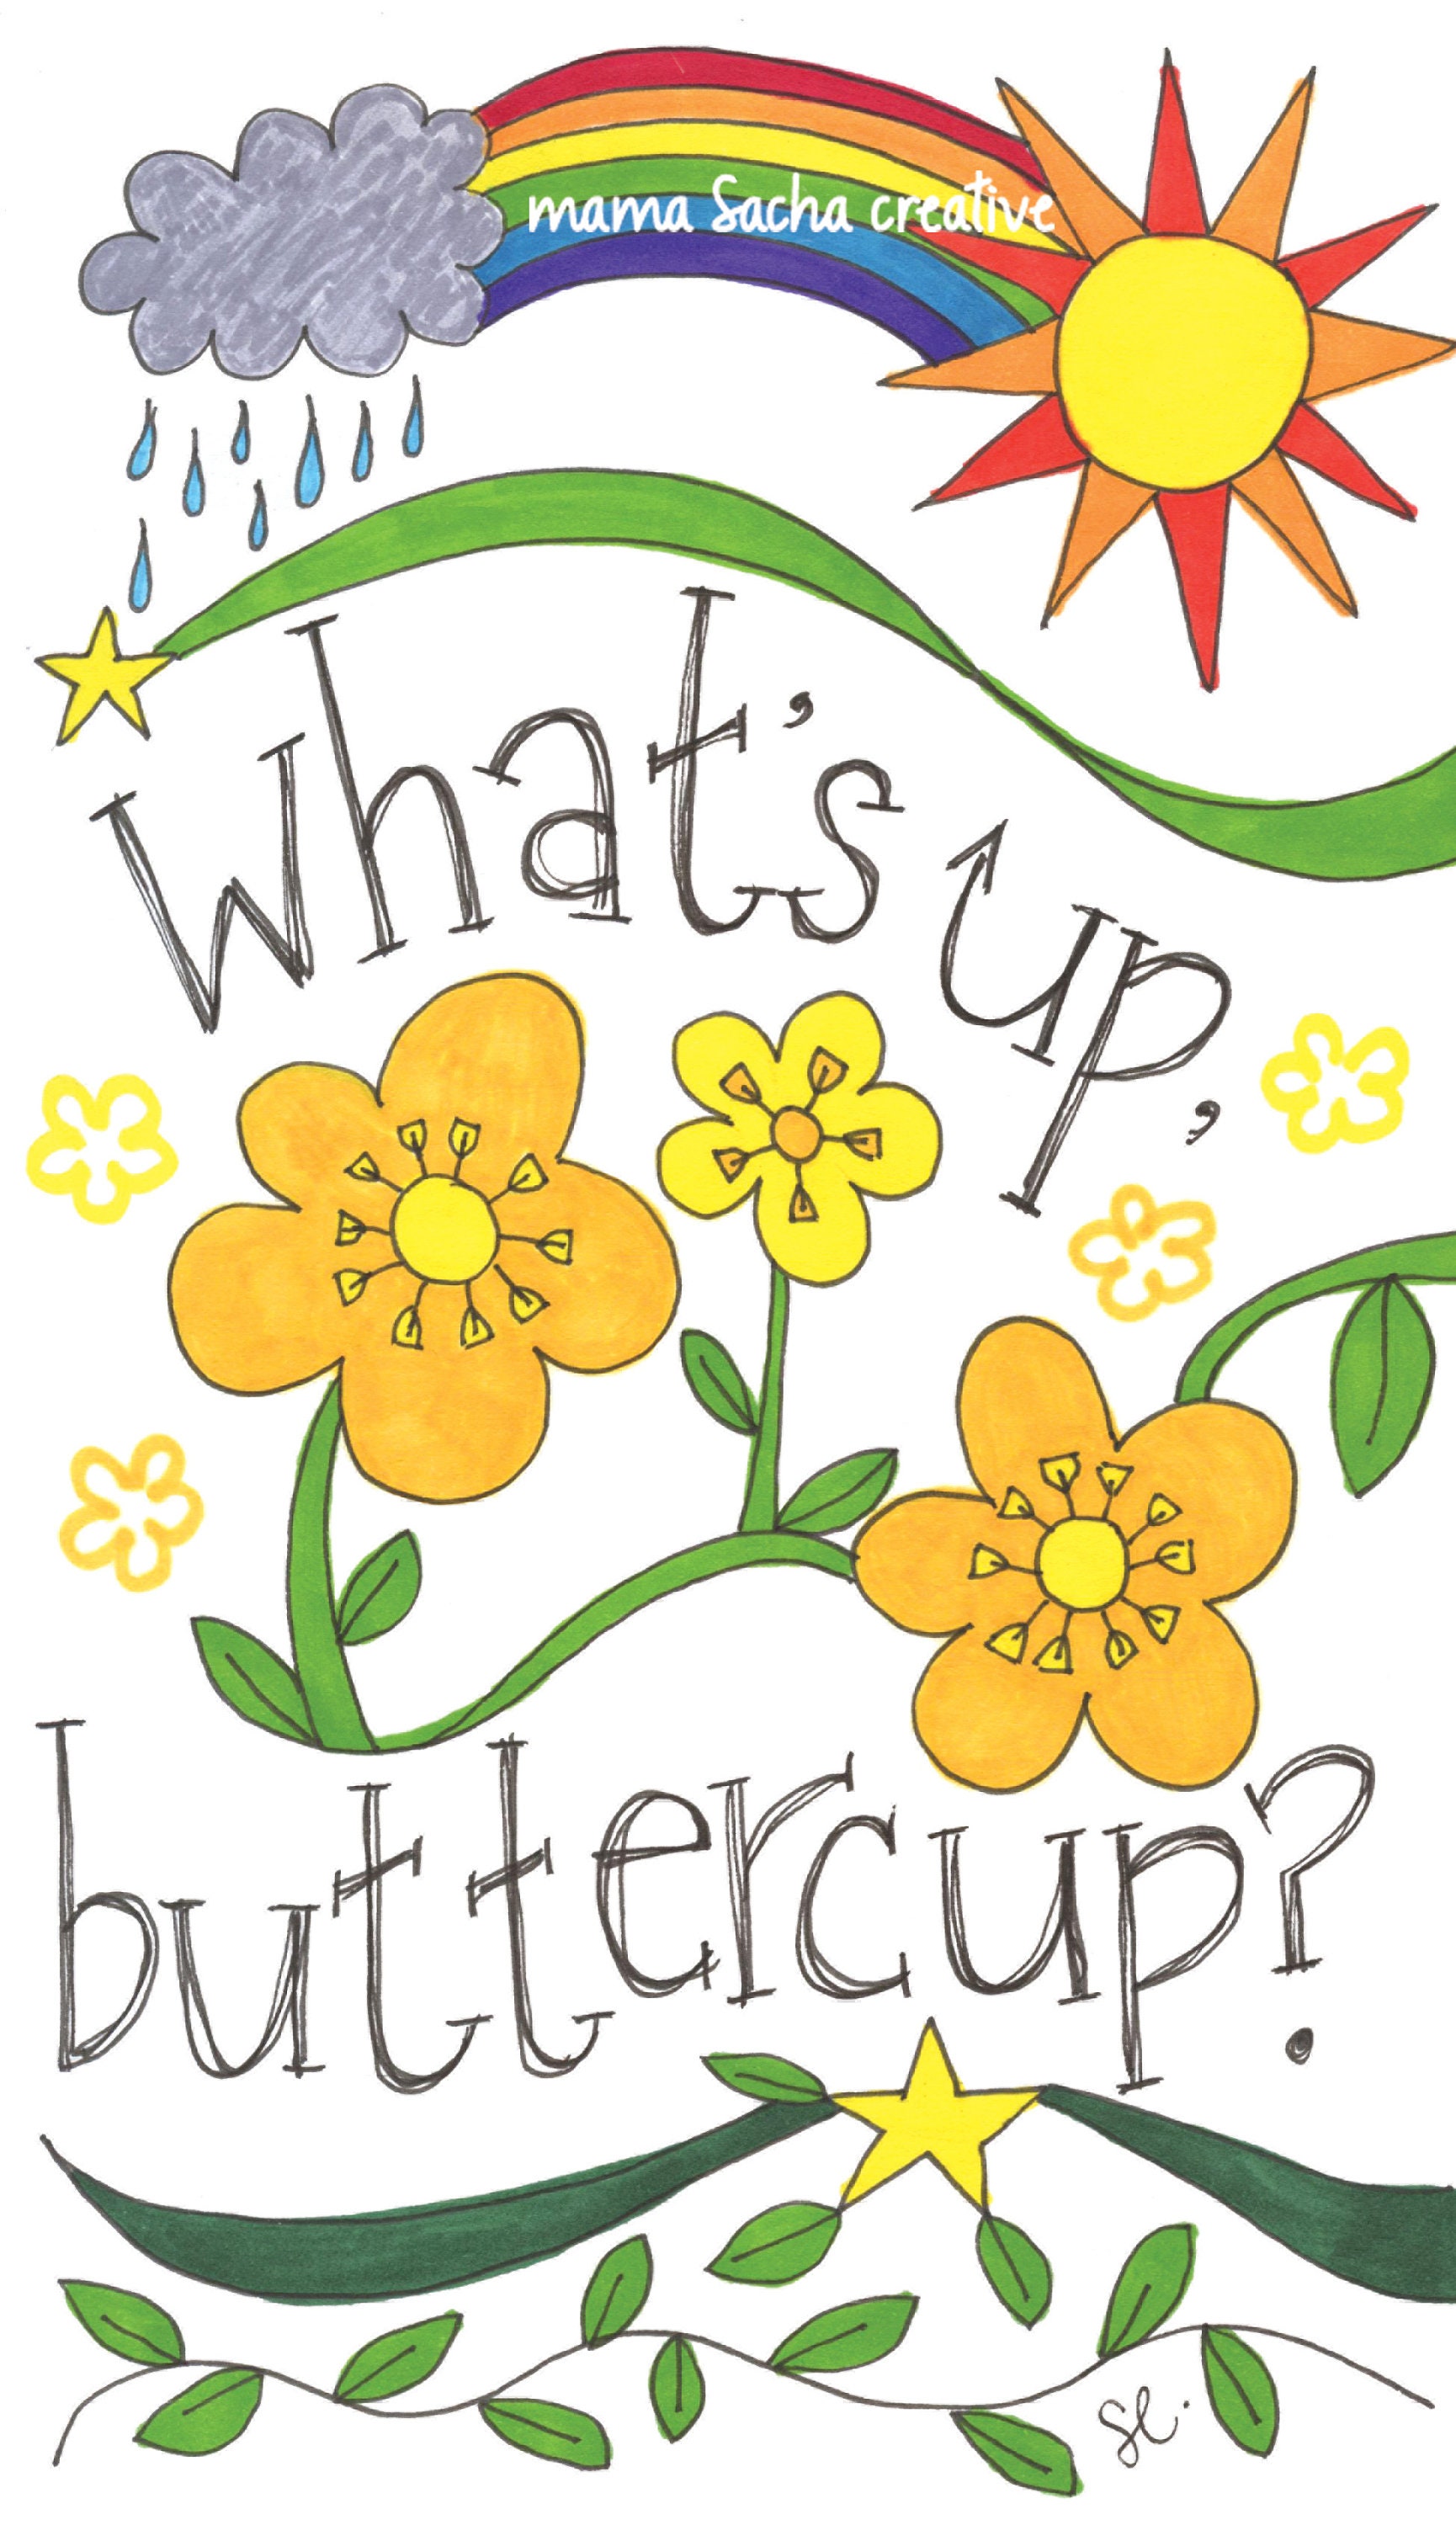 What's Up Buttercup card